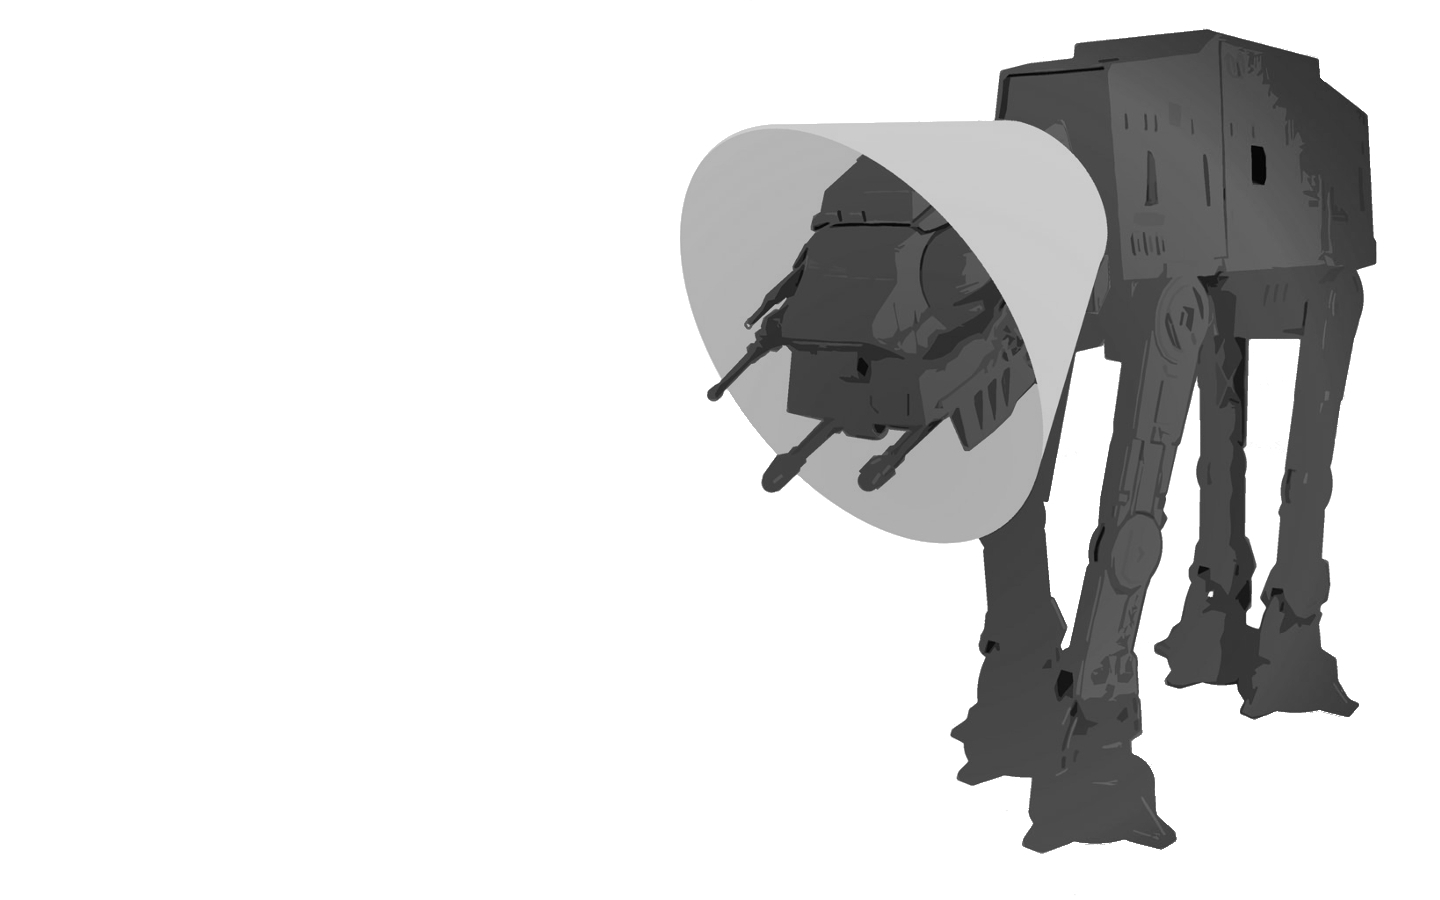 AT-AT Walker with a Elizabethan collar on